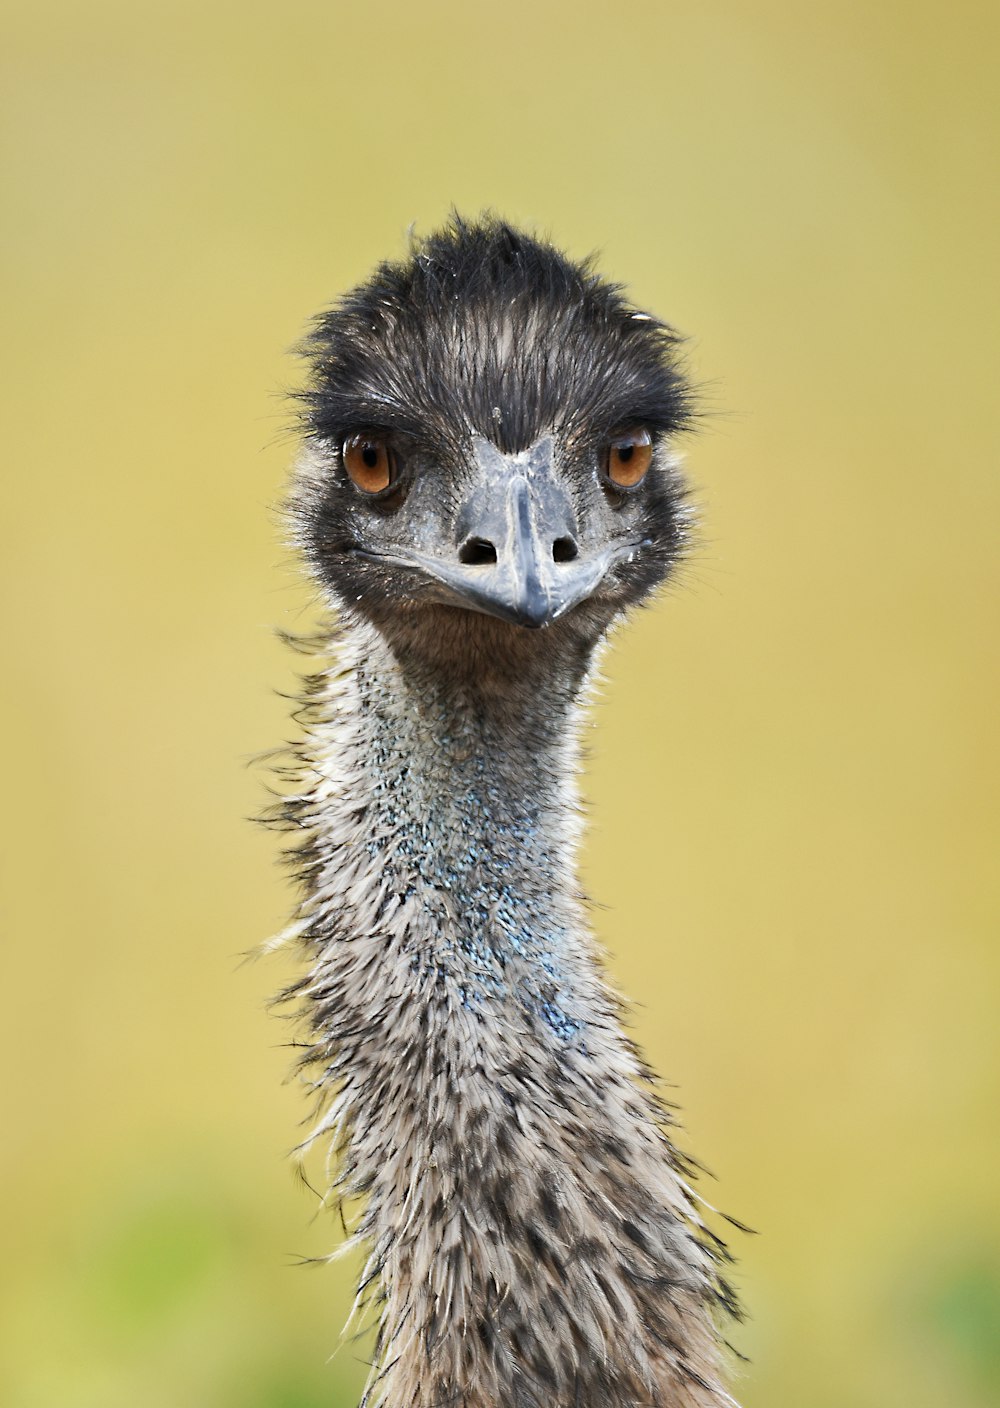 a close up of an ostrich looking at the camera